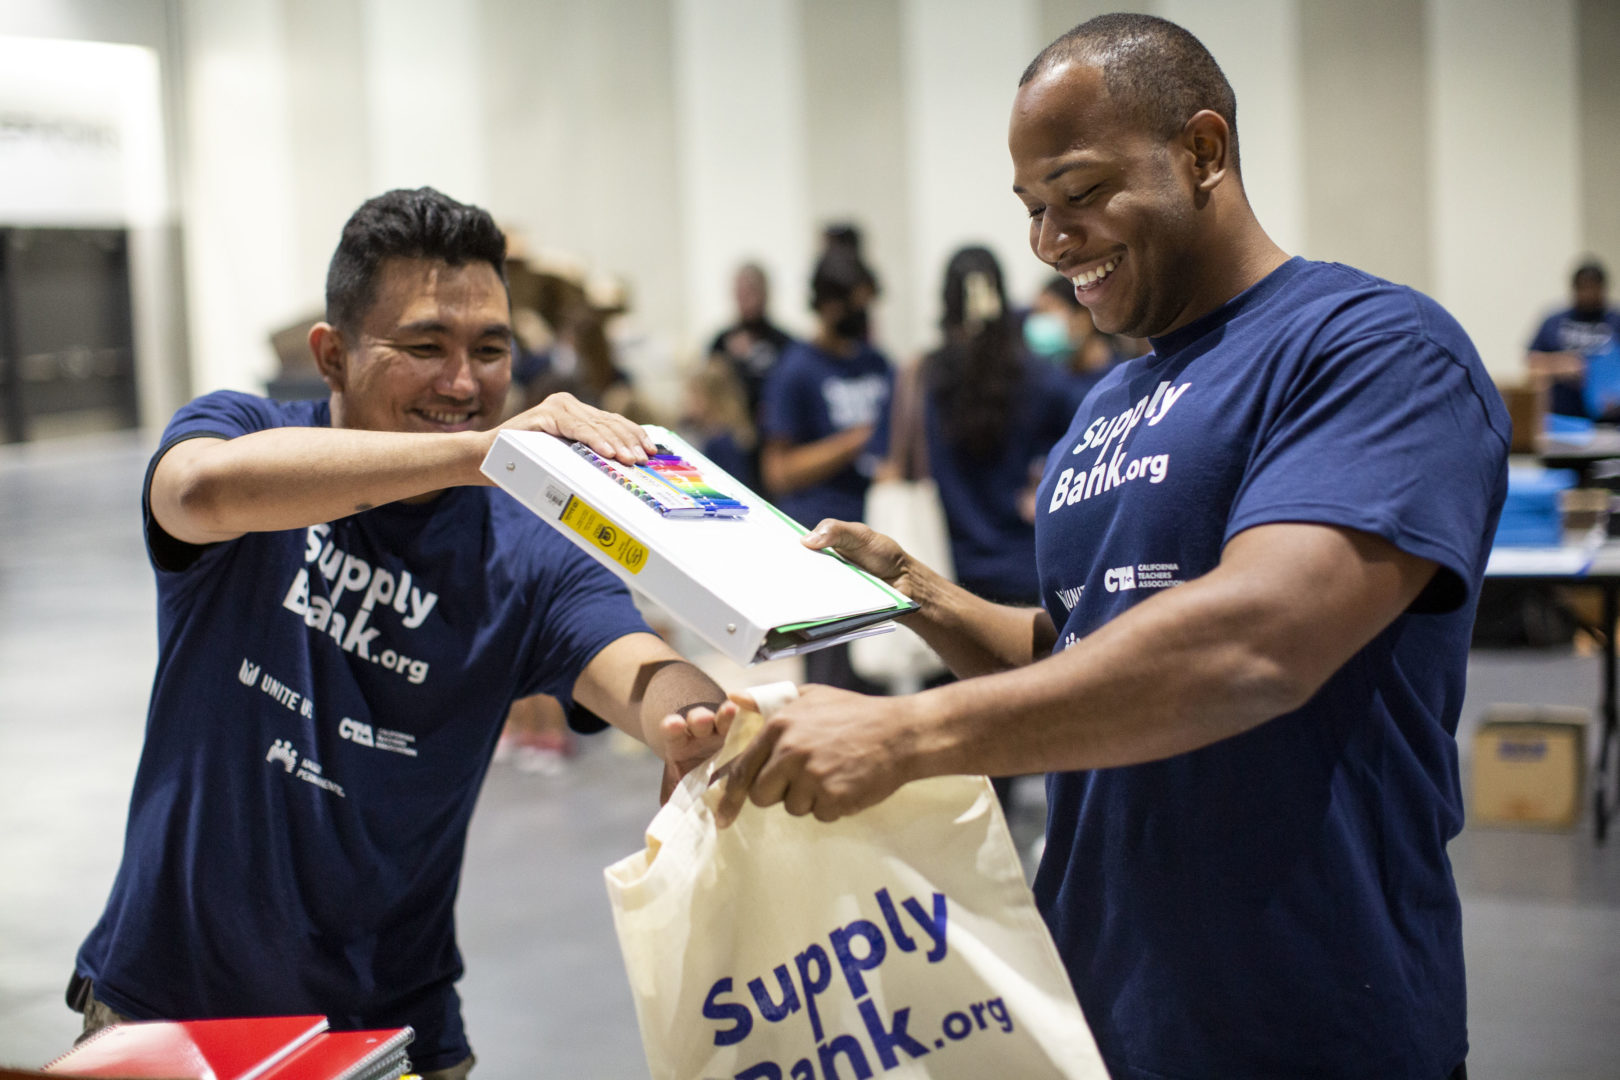 interior Empowering Education: SupplyBank.org and KTVU Unite to Support Local Students banner image